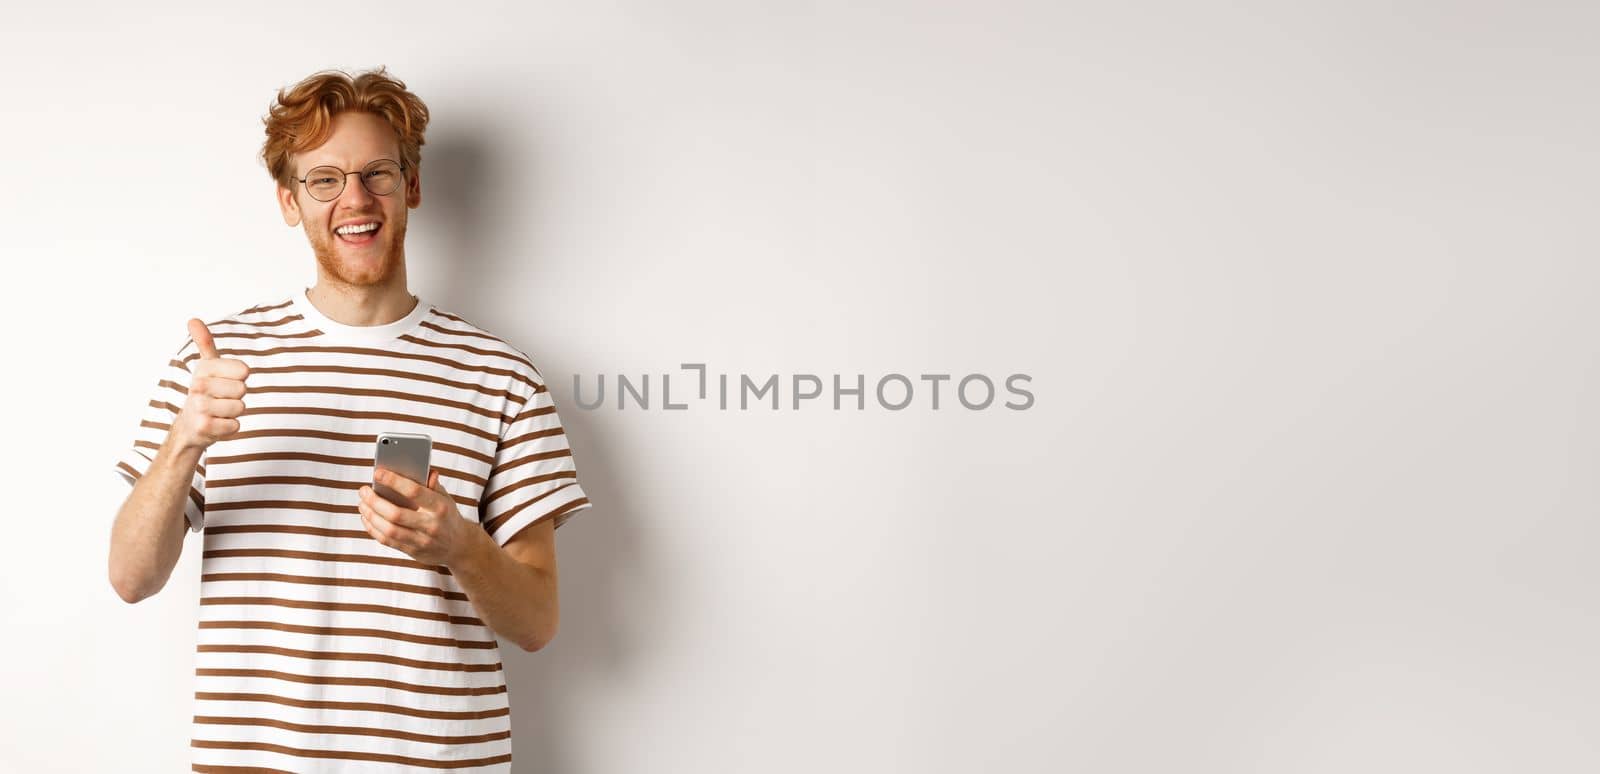 Technology and e-commerce concept. Satisfied male model with red hair, showing thumbs-up and holding smartphone, white background.